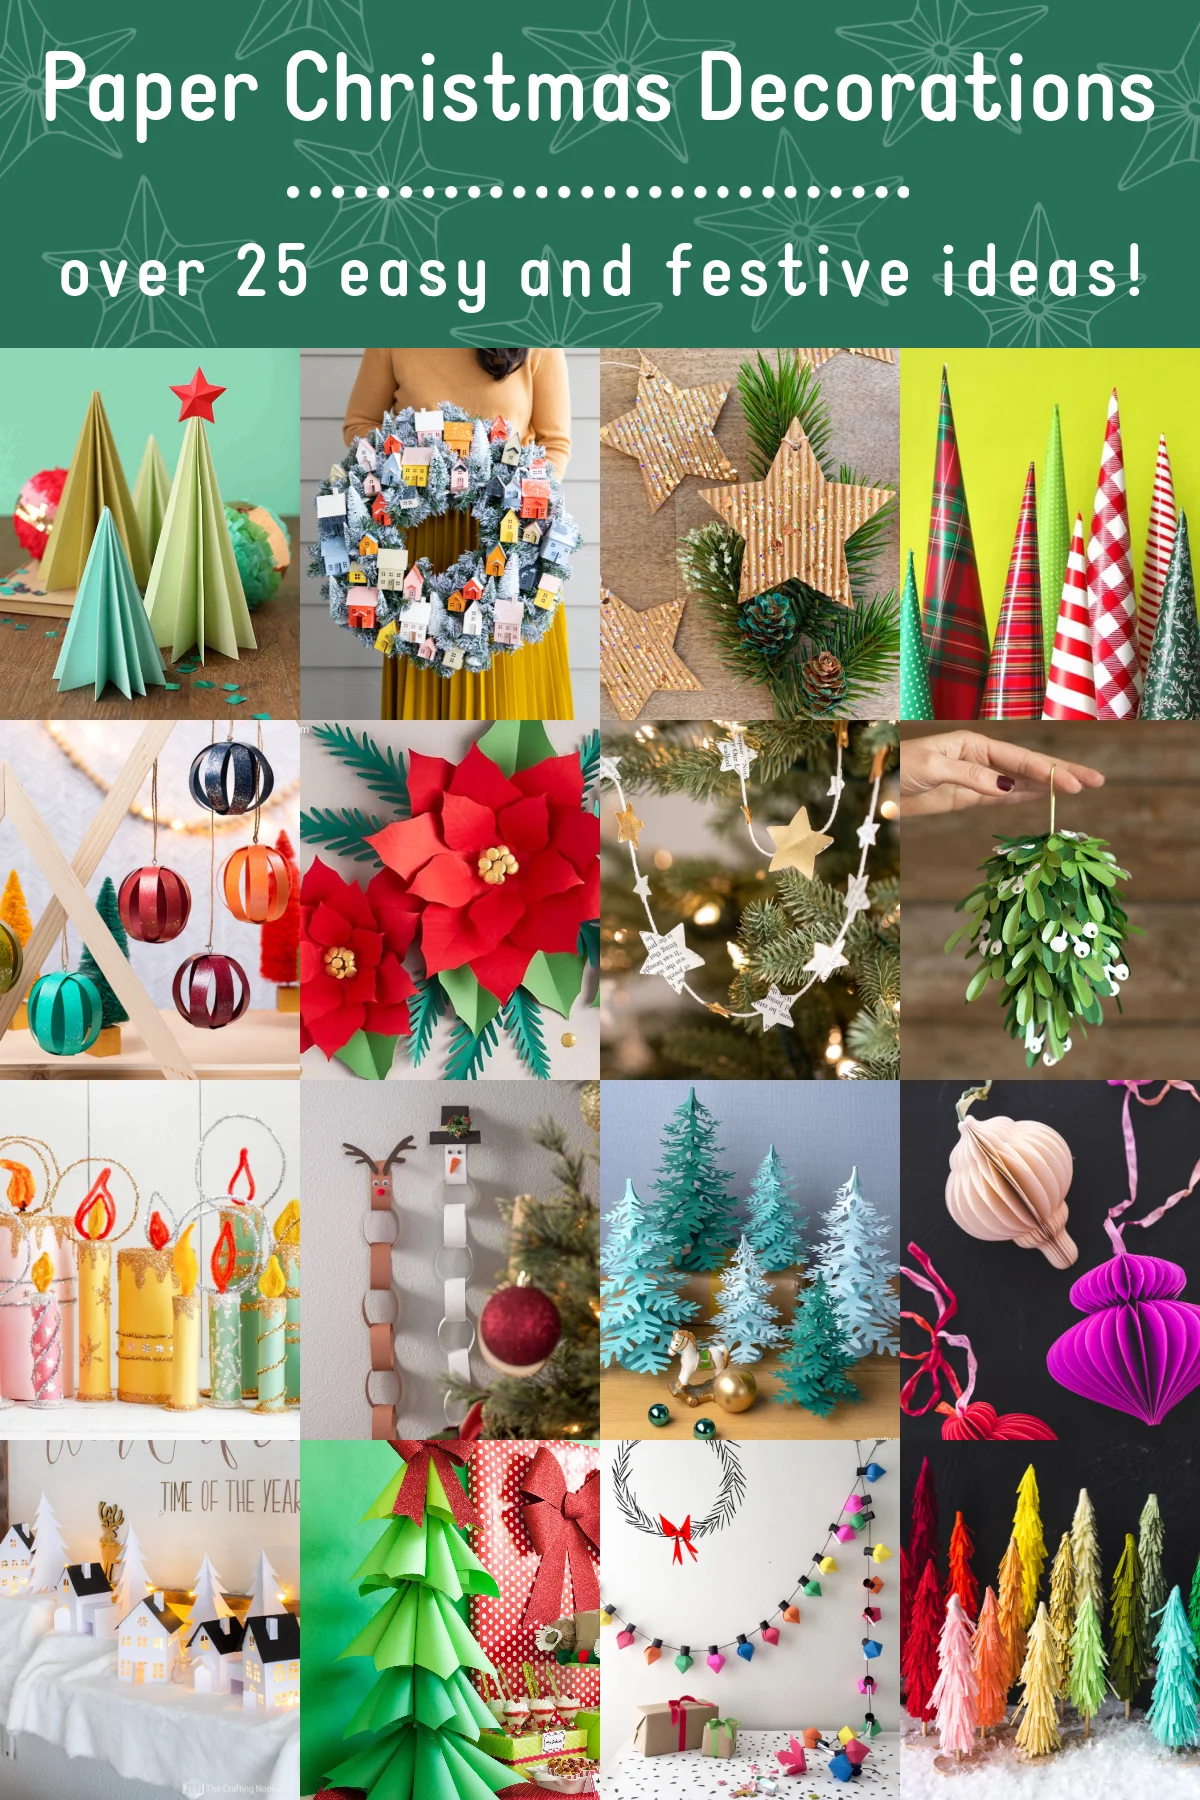 Honeycomb Ornaments Template & Tutorial - Lia Griffith